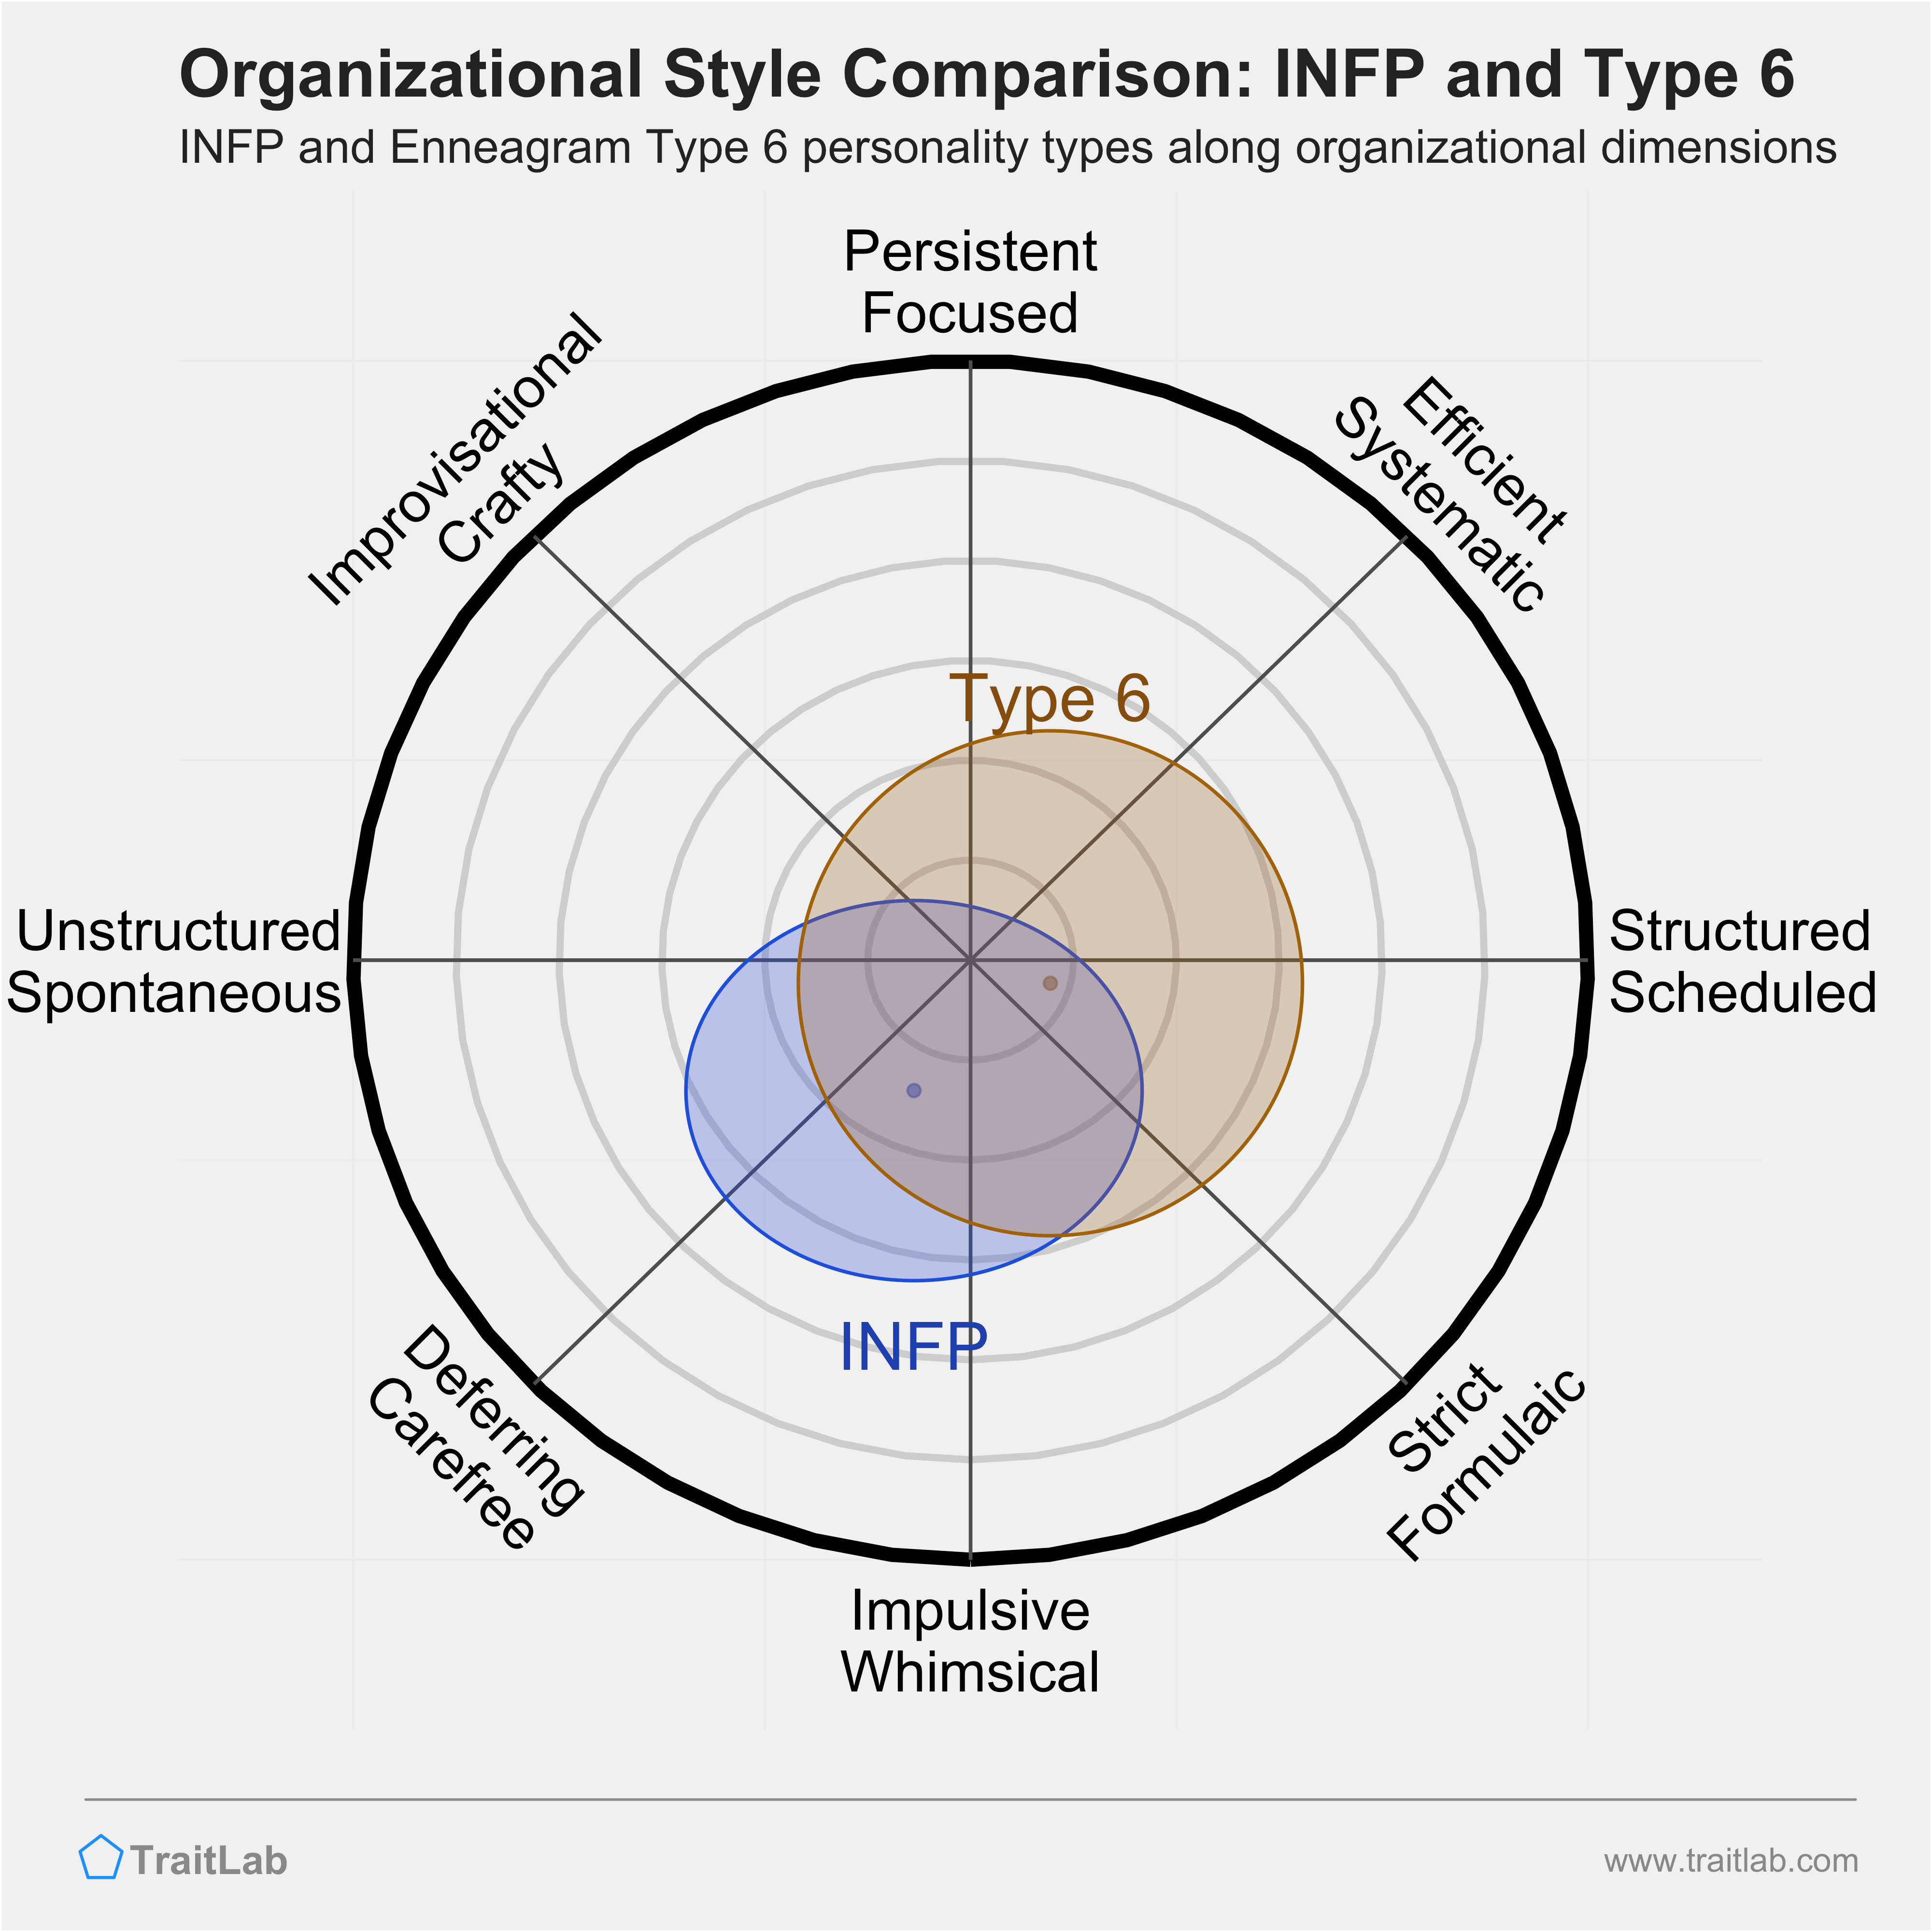 INFP and Type 6 comparison across organizational dimensions